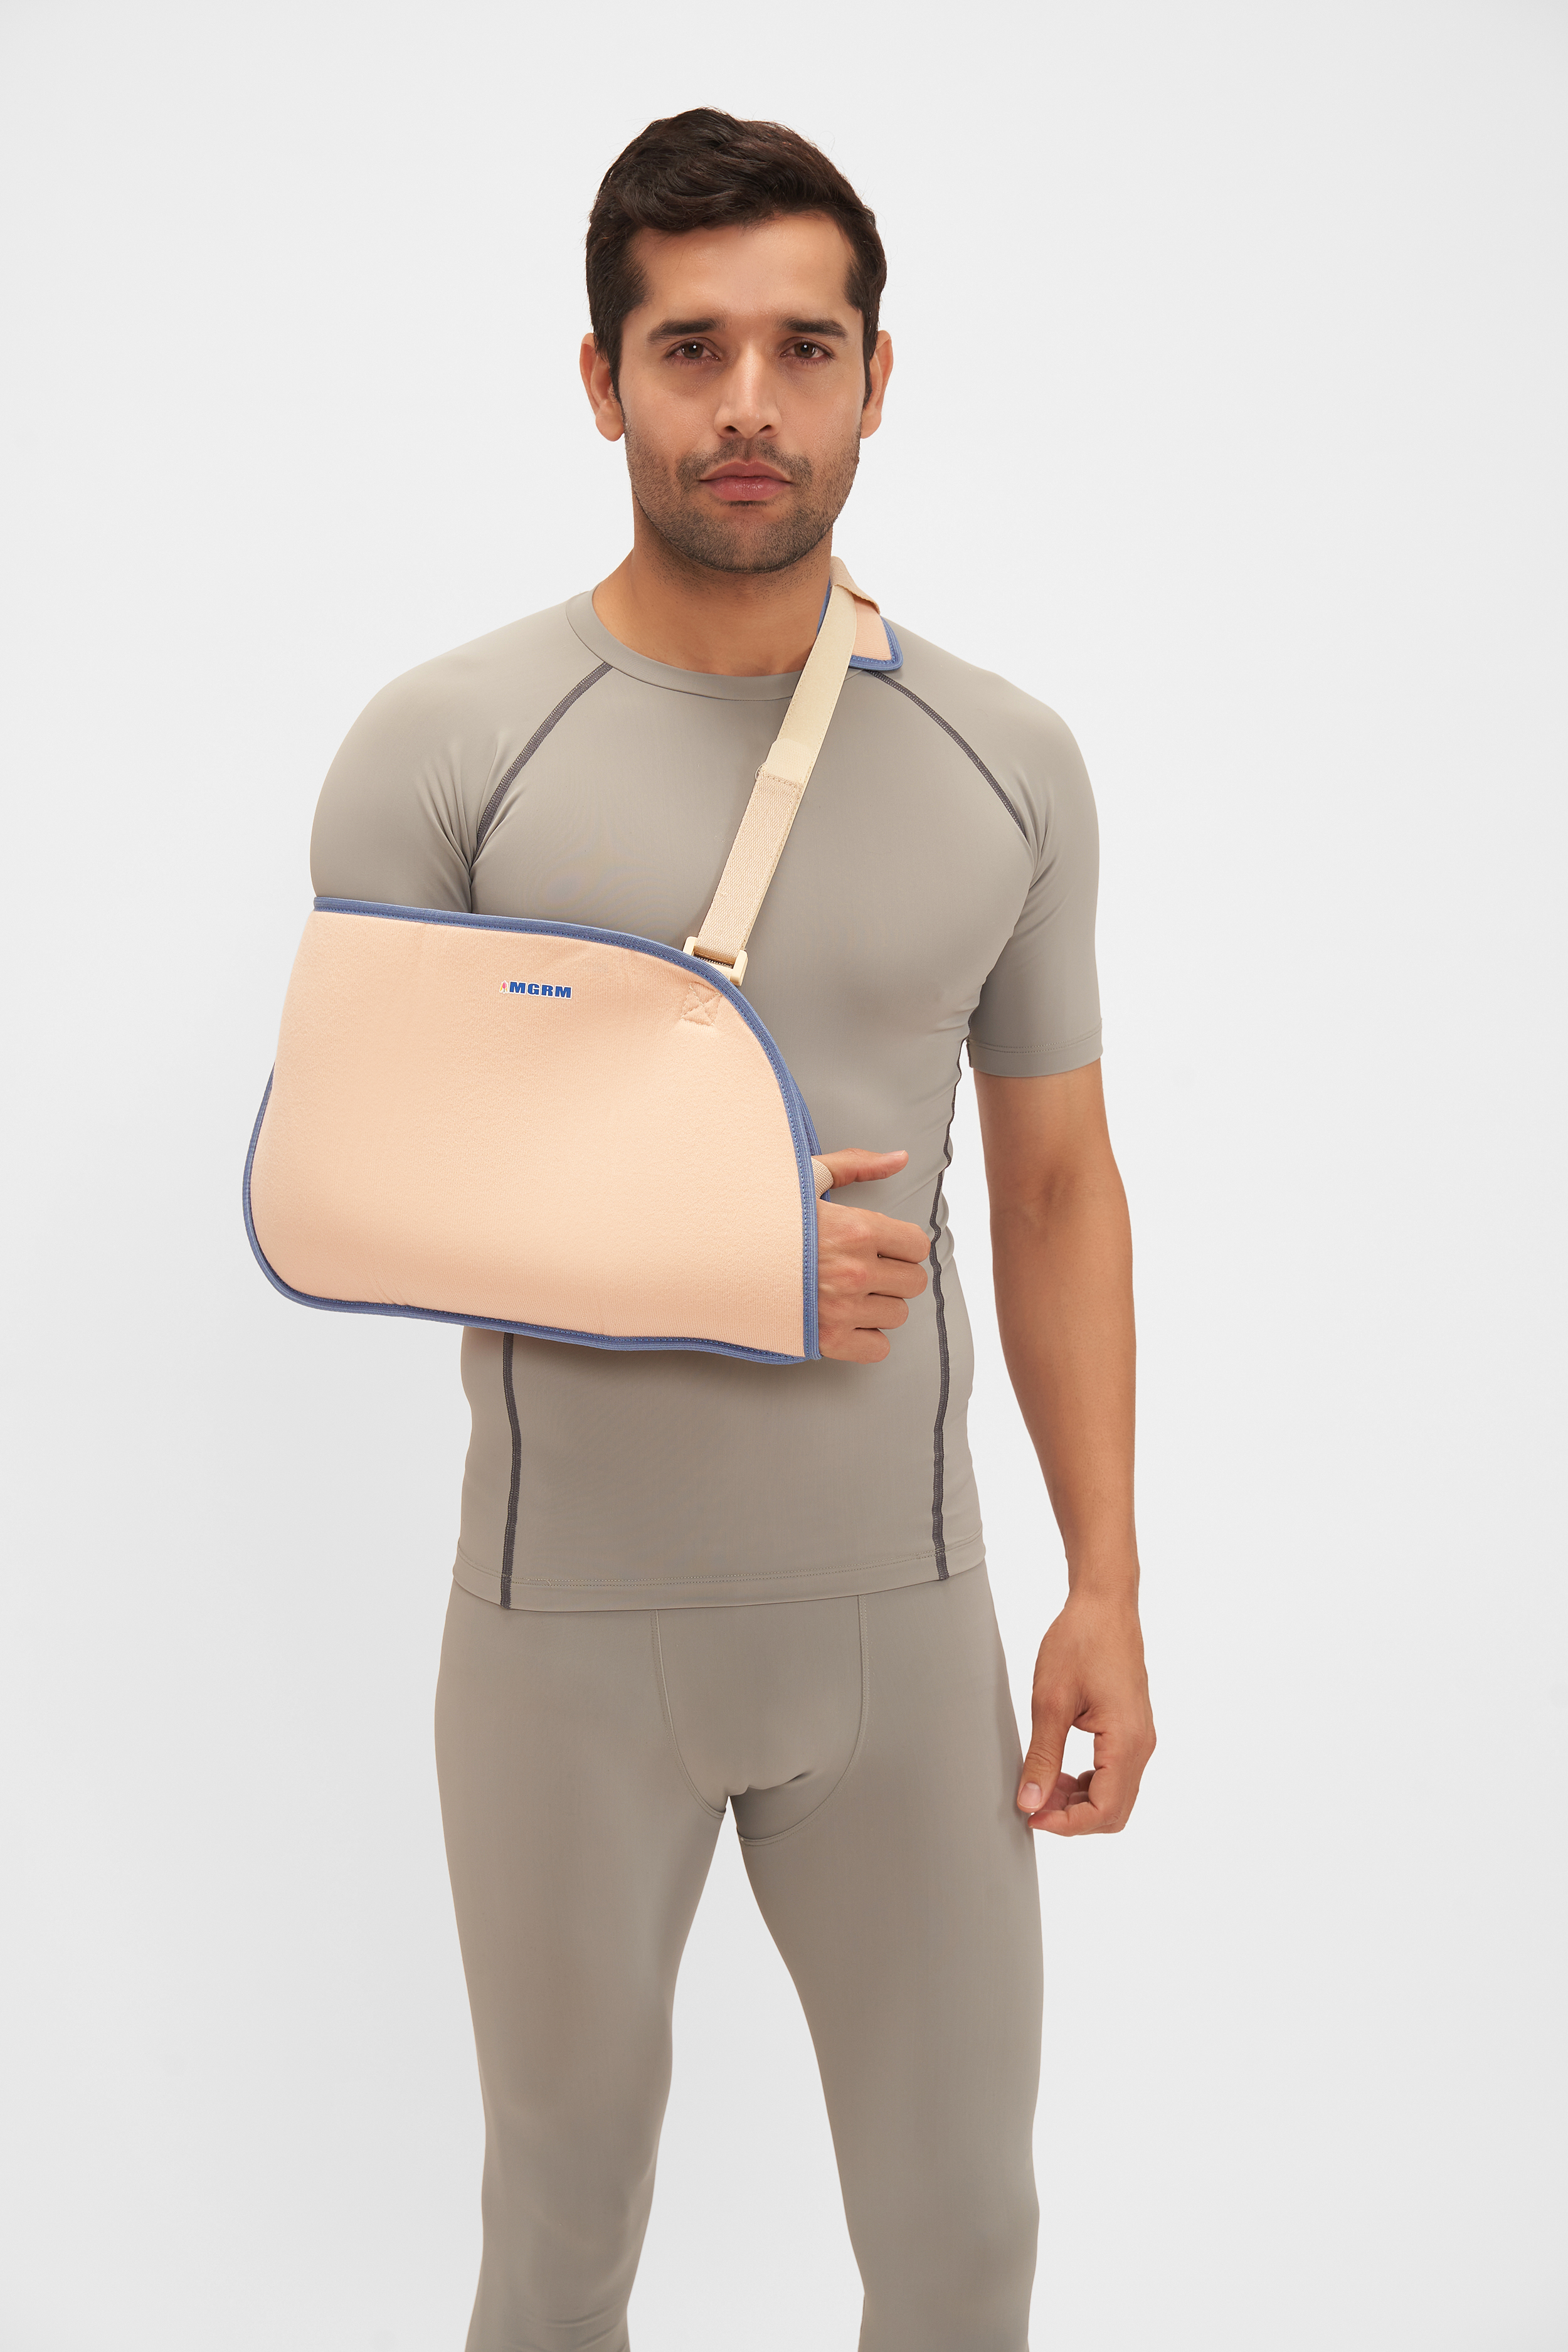 MGRM Arm Sling Pouch Prime